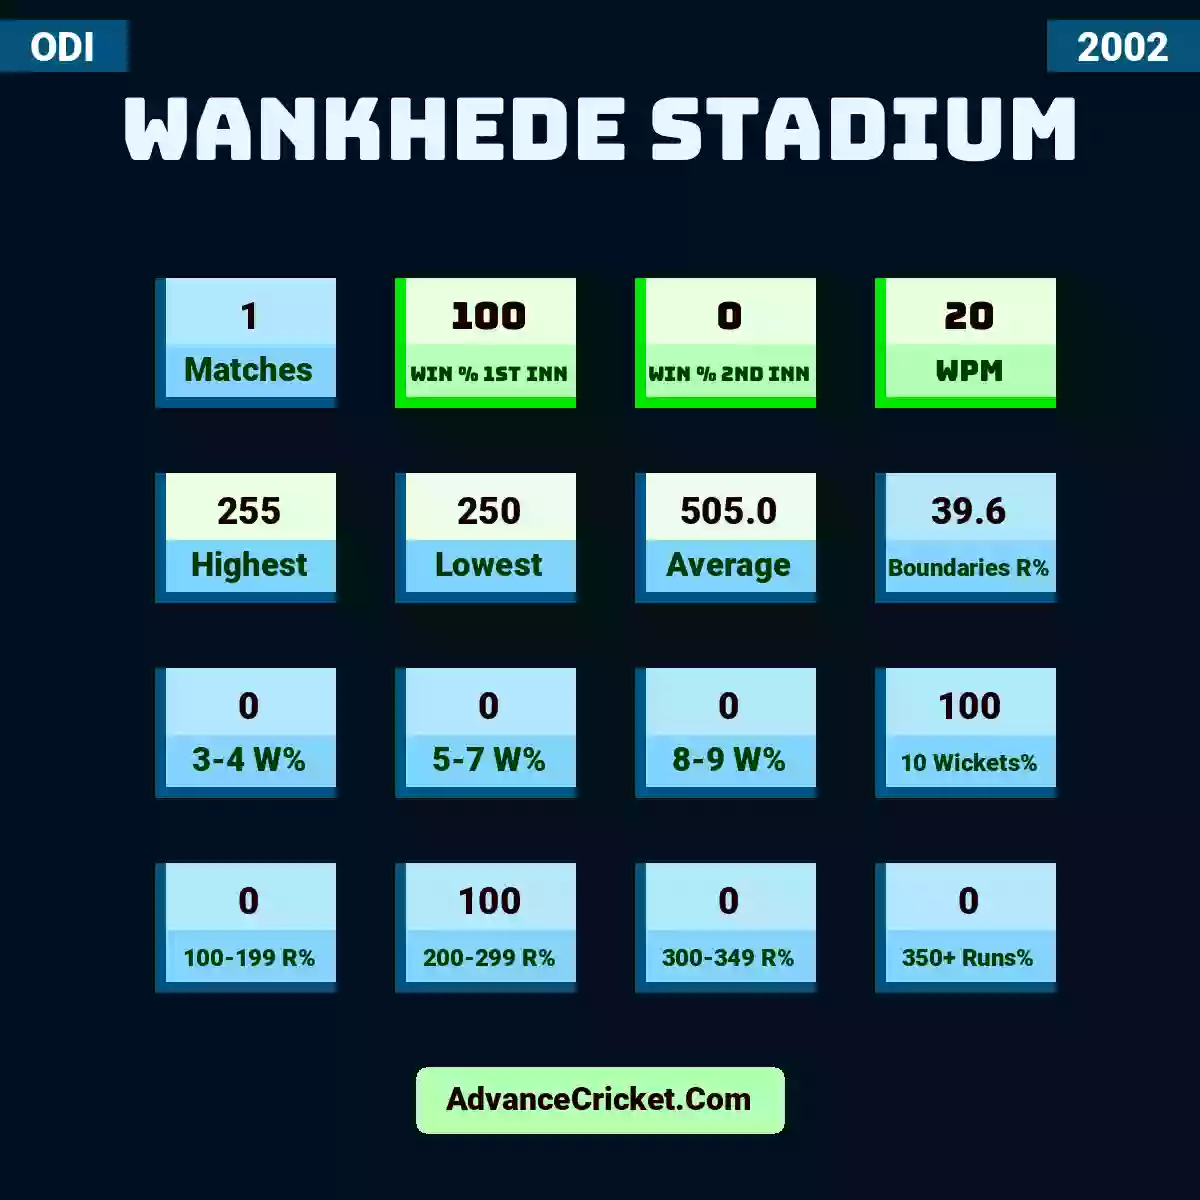 Image showing Wankhede Stadium with Matches: 1, Win % 1st Inn: 100, Win % 2nd Inn: 0, WPM: 20, Highest: 255, Lowest: 250, Average: 505.0, Boundaries R%: 39.6, 3-4 W%: 0, 5-7 W%: 0, 8-9 W%: 0, 10 Wickets%: 100, 100-199 R%: 0, 200-299 R%: 100, 300-349 R%: 0, 350+ Runs%: 0.